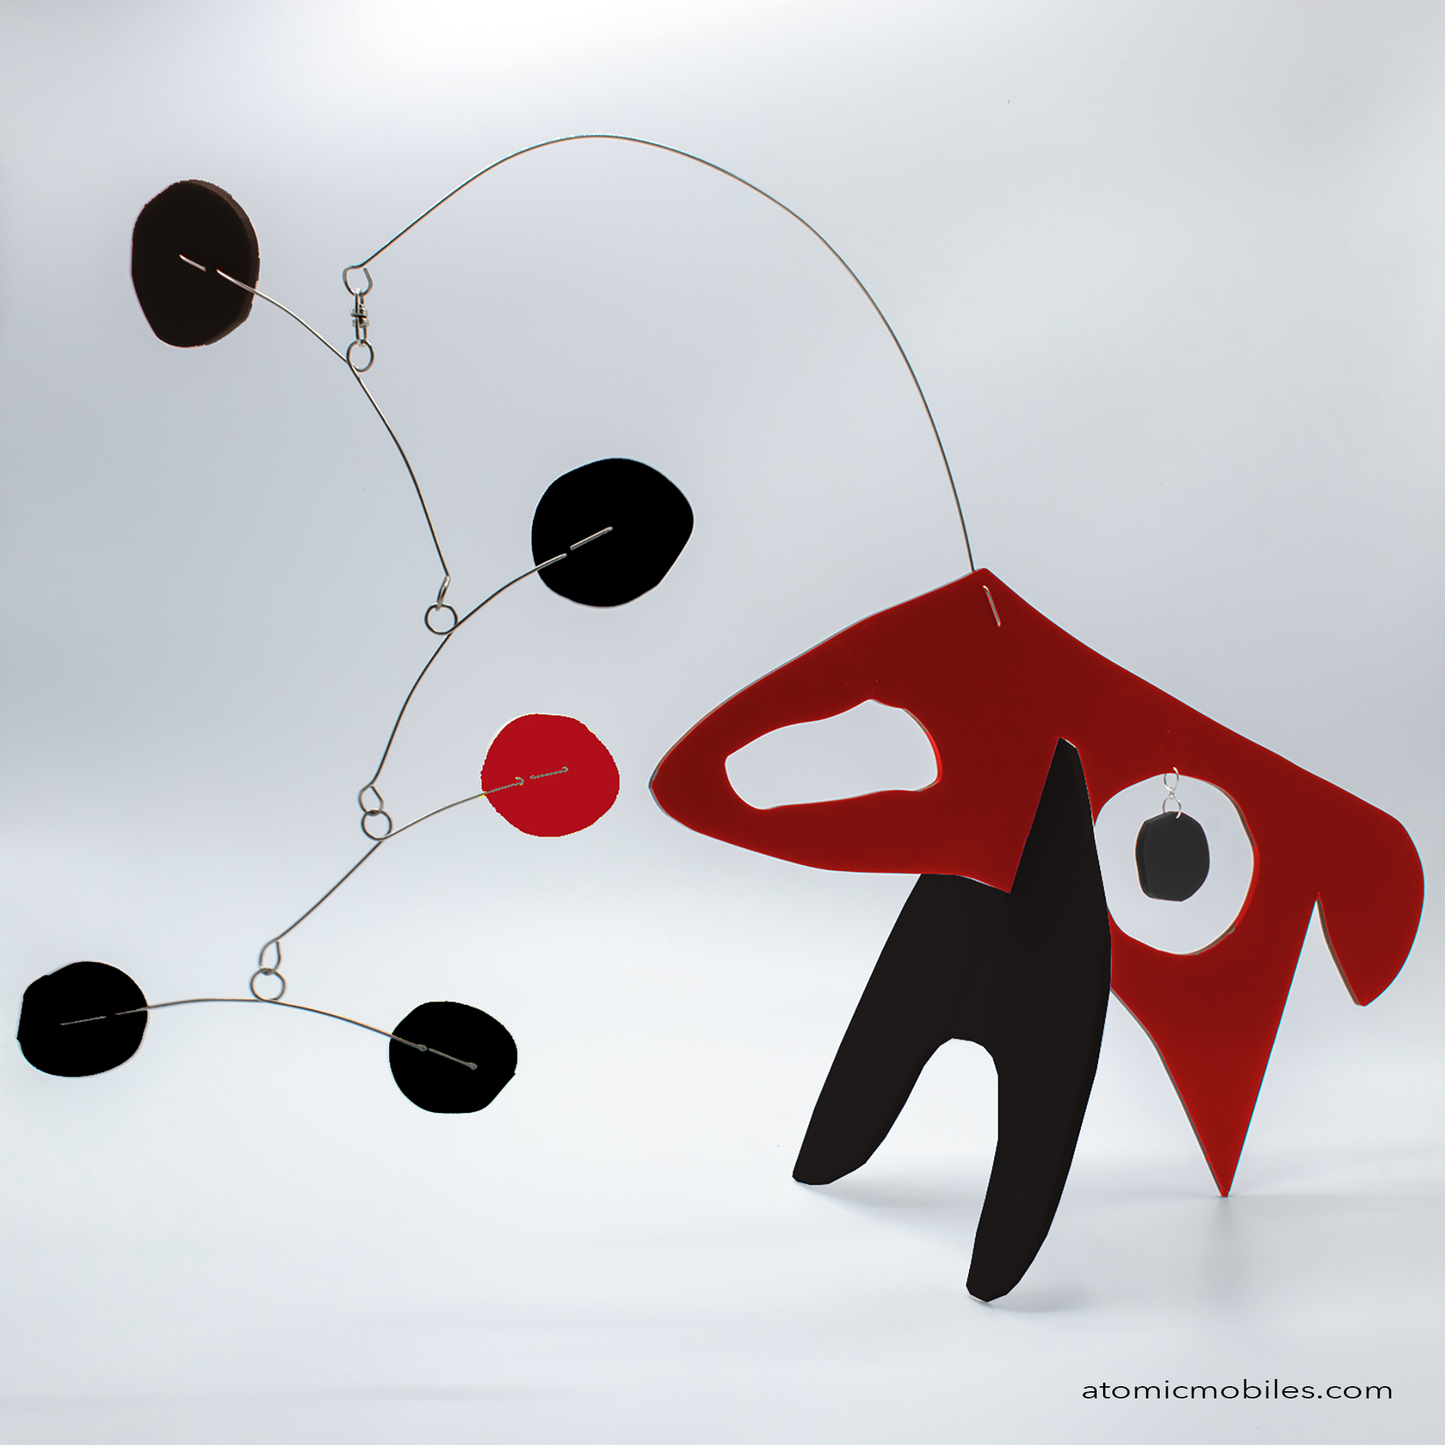 KinetiCats Collection Dog in Red and Black - one of 12 Modern Cute Abstract Animal Art Sculpture Kinetic Stabiles inspired by Dada and mid century modern style art by AtomicMobiles.com